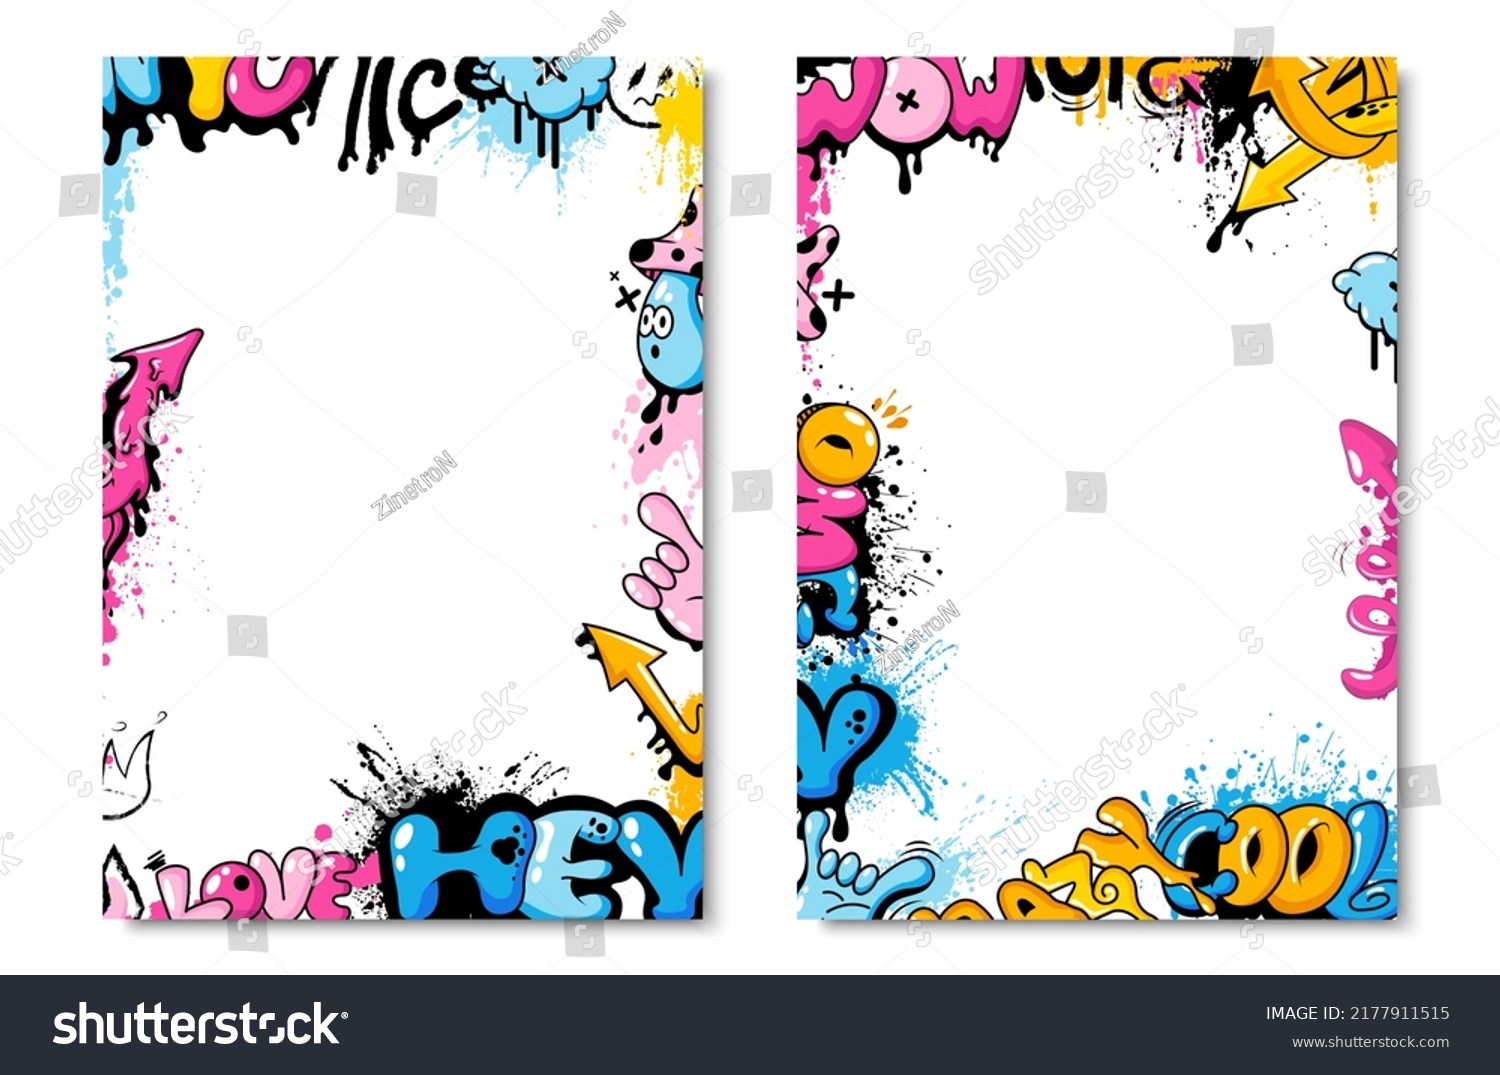 SVG of Colorful cute graffiti frame, poster or poster layout, art covers. Graphic set of street art with tags and graffiti with effect. A collection of street art background images. Vector illustration svg